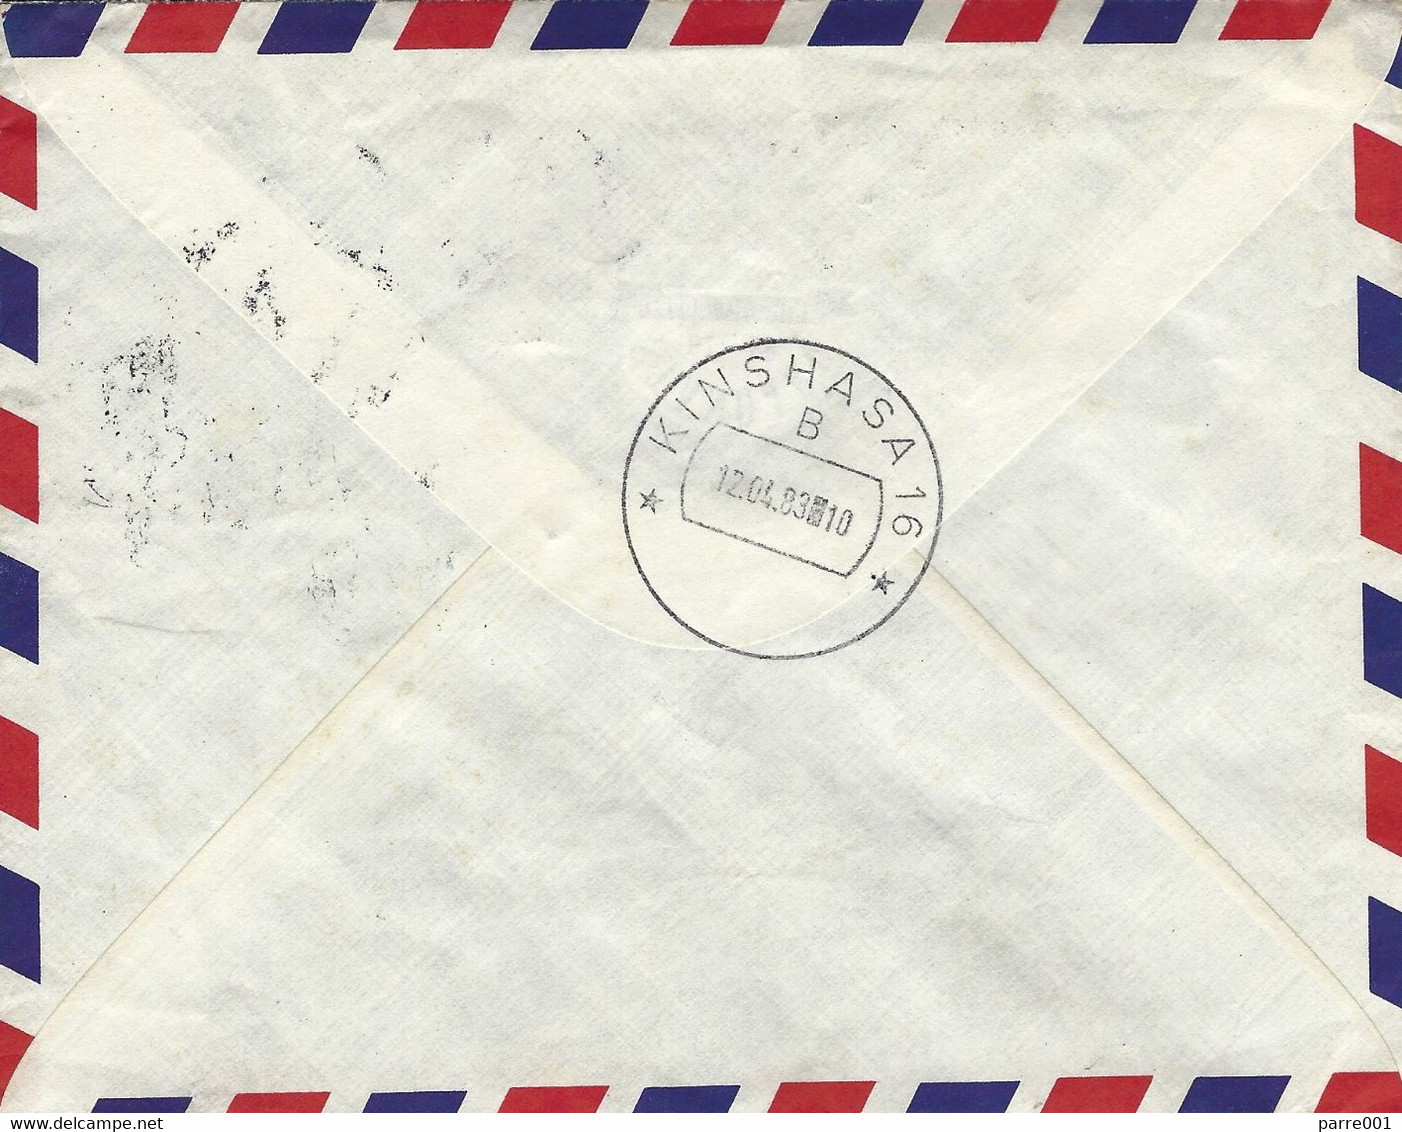 Zaire Congo 1983 Kinshasa 16 Norman Rockwell Inconnu Instructional Handstamp Returned Cover - Used Stamps